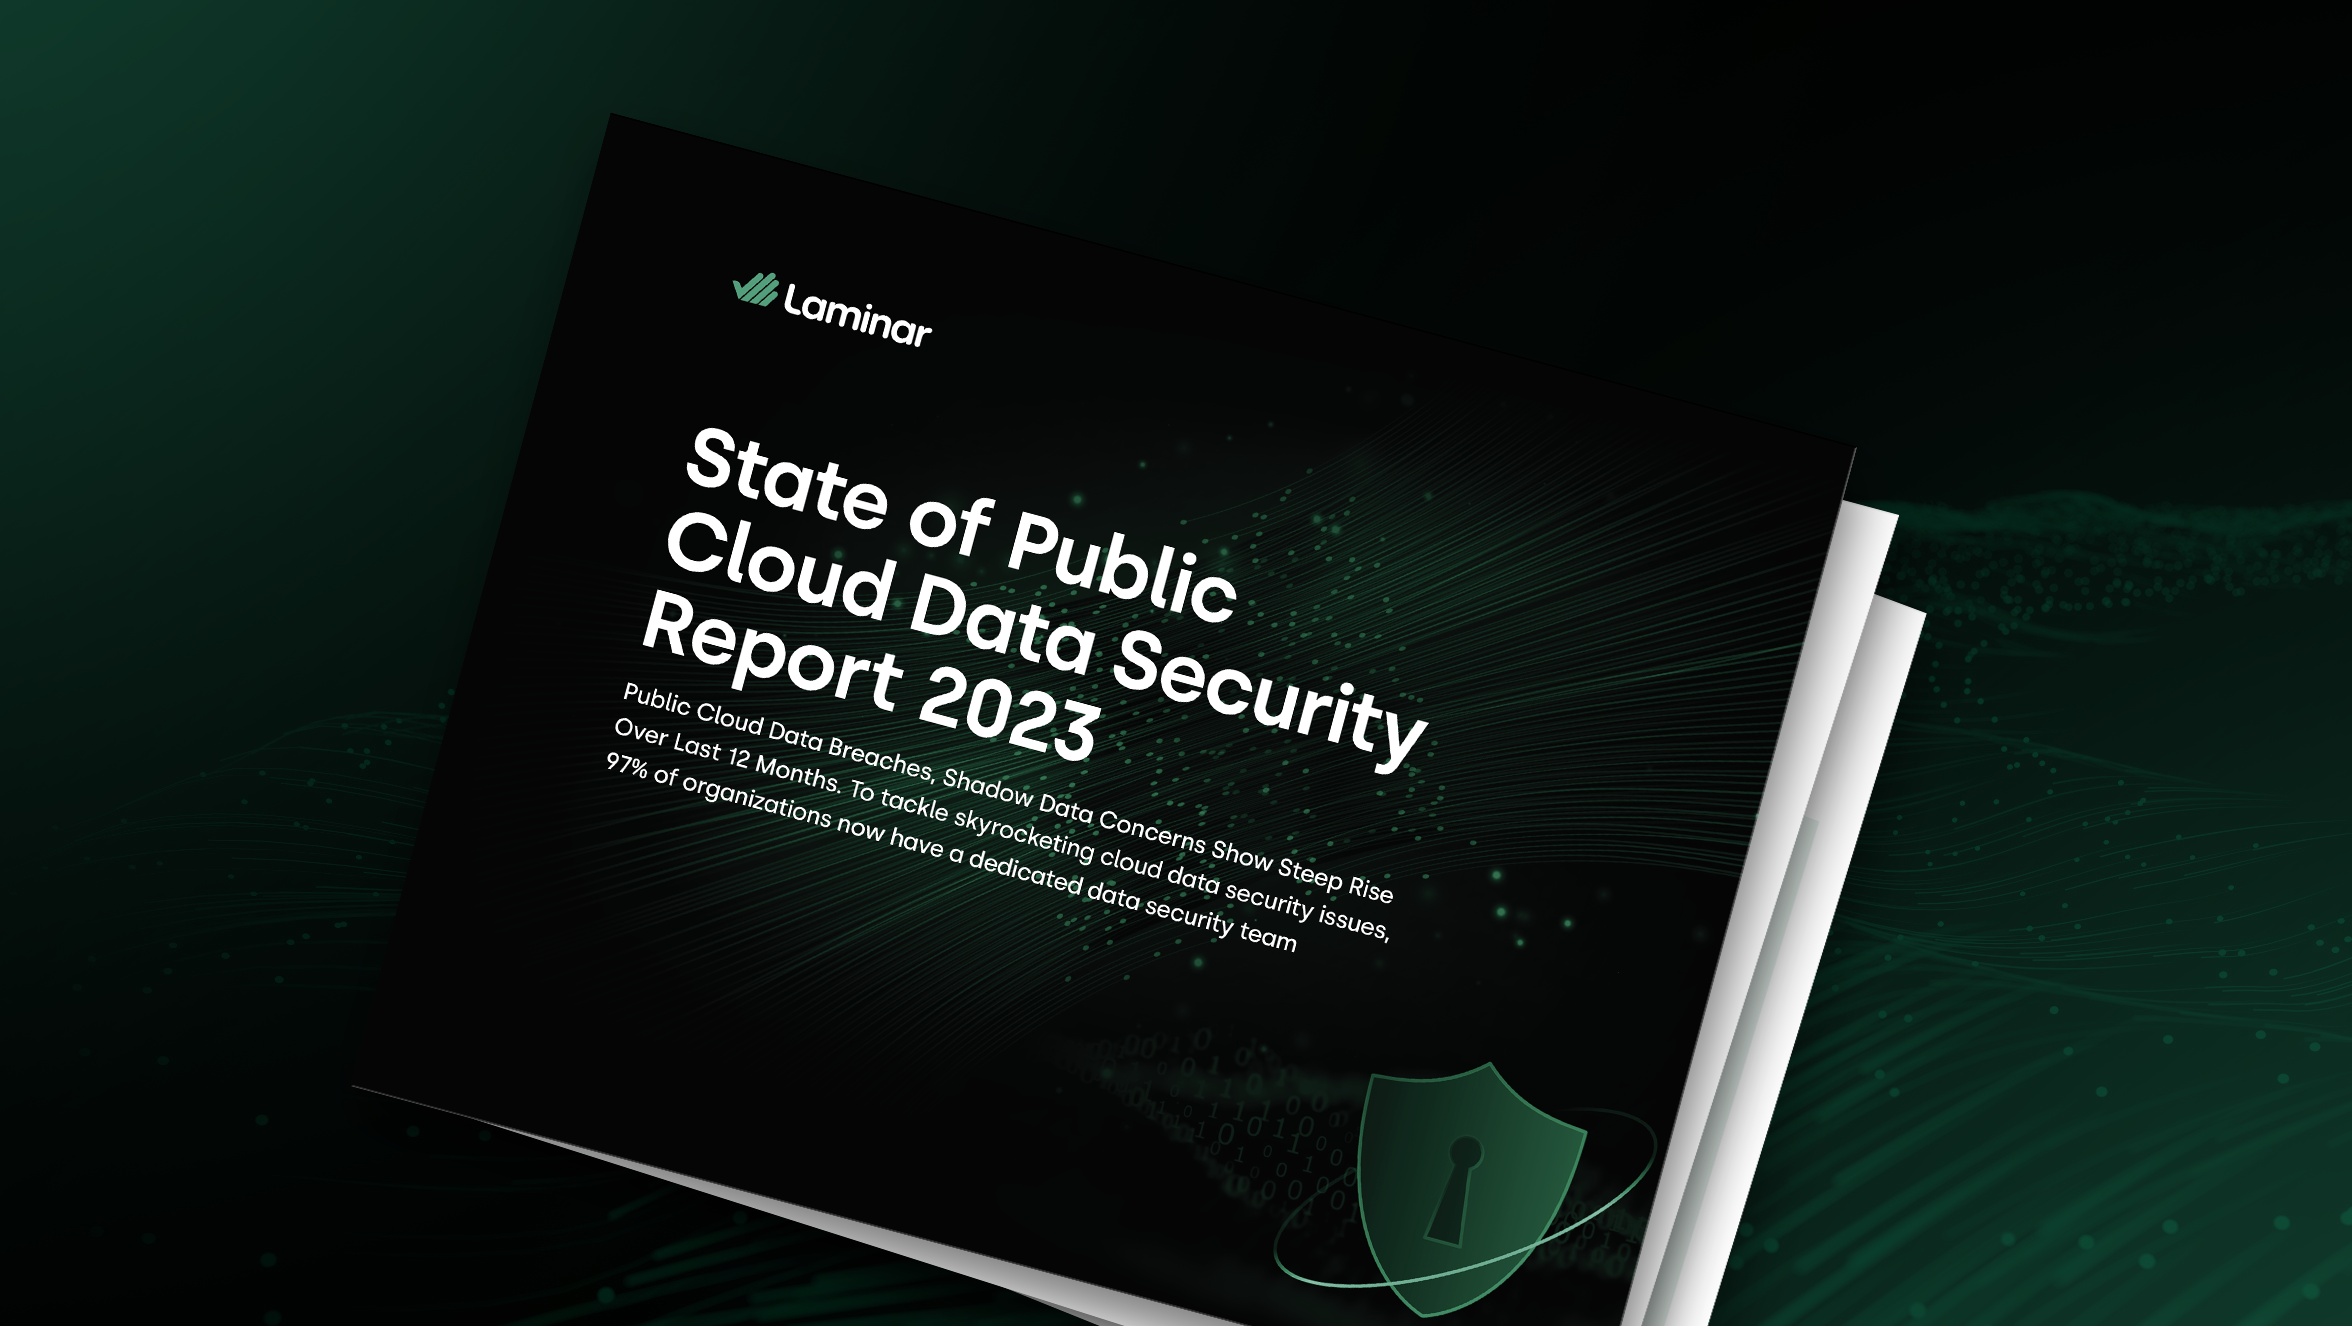 State of Cloud Data Security Report Reveals Increase in Cloud Data Breaches, Shadow Data Concerns